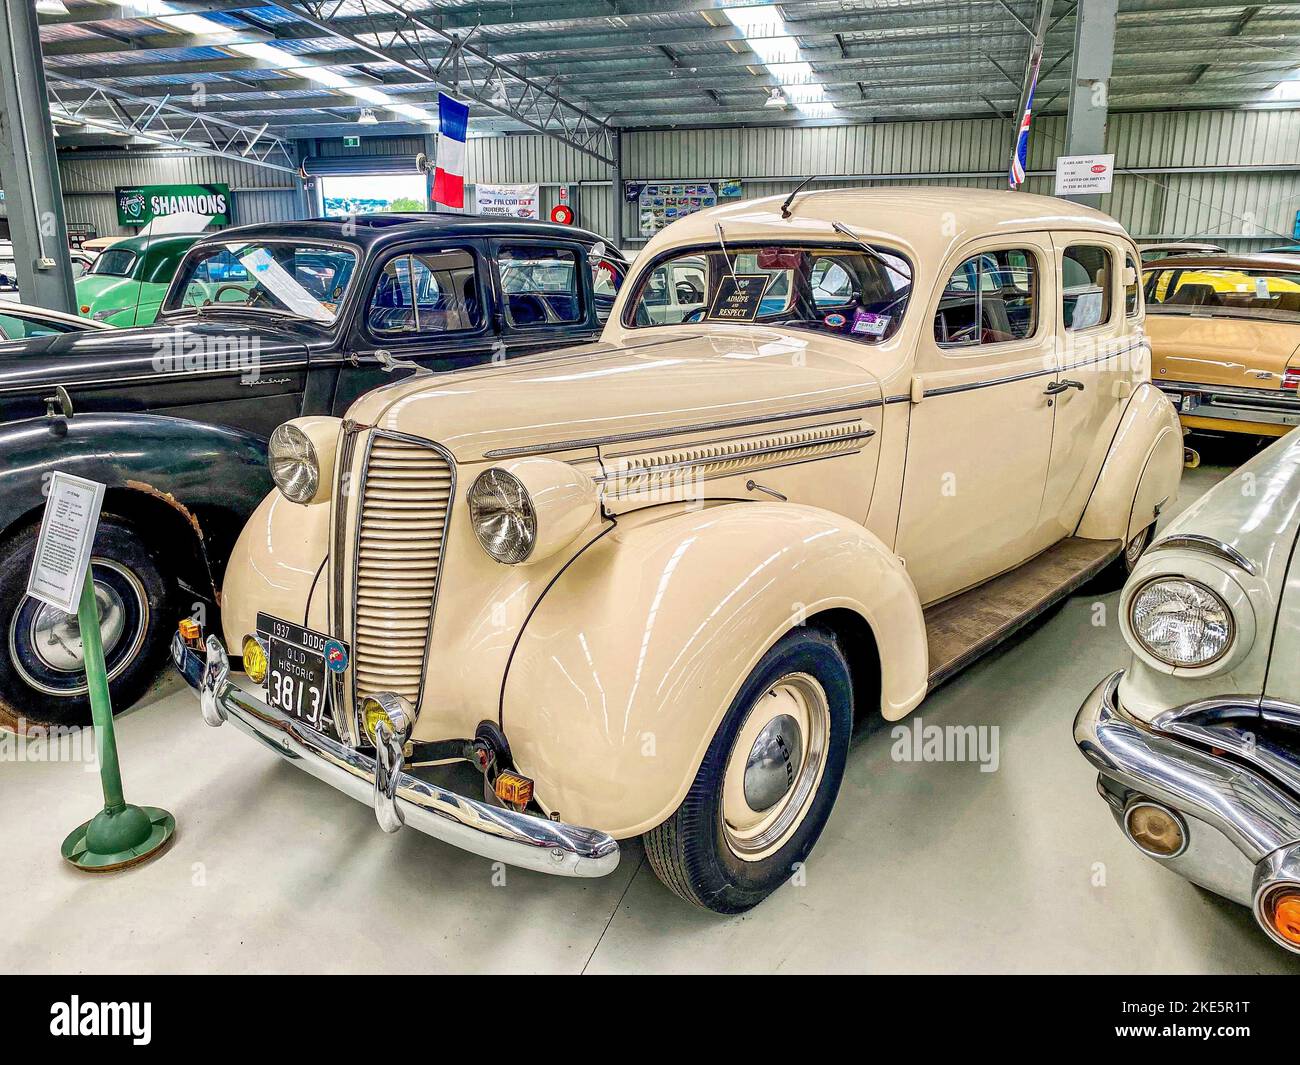 A 1937 Dodge Wagon on Display at the National Transport Museum Stock Photo